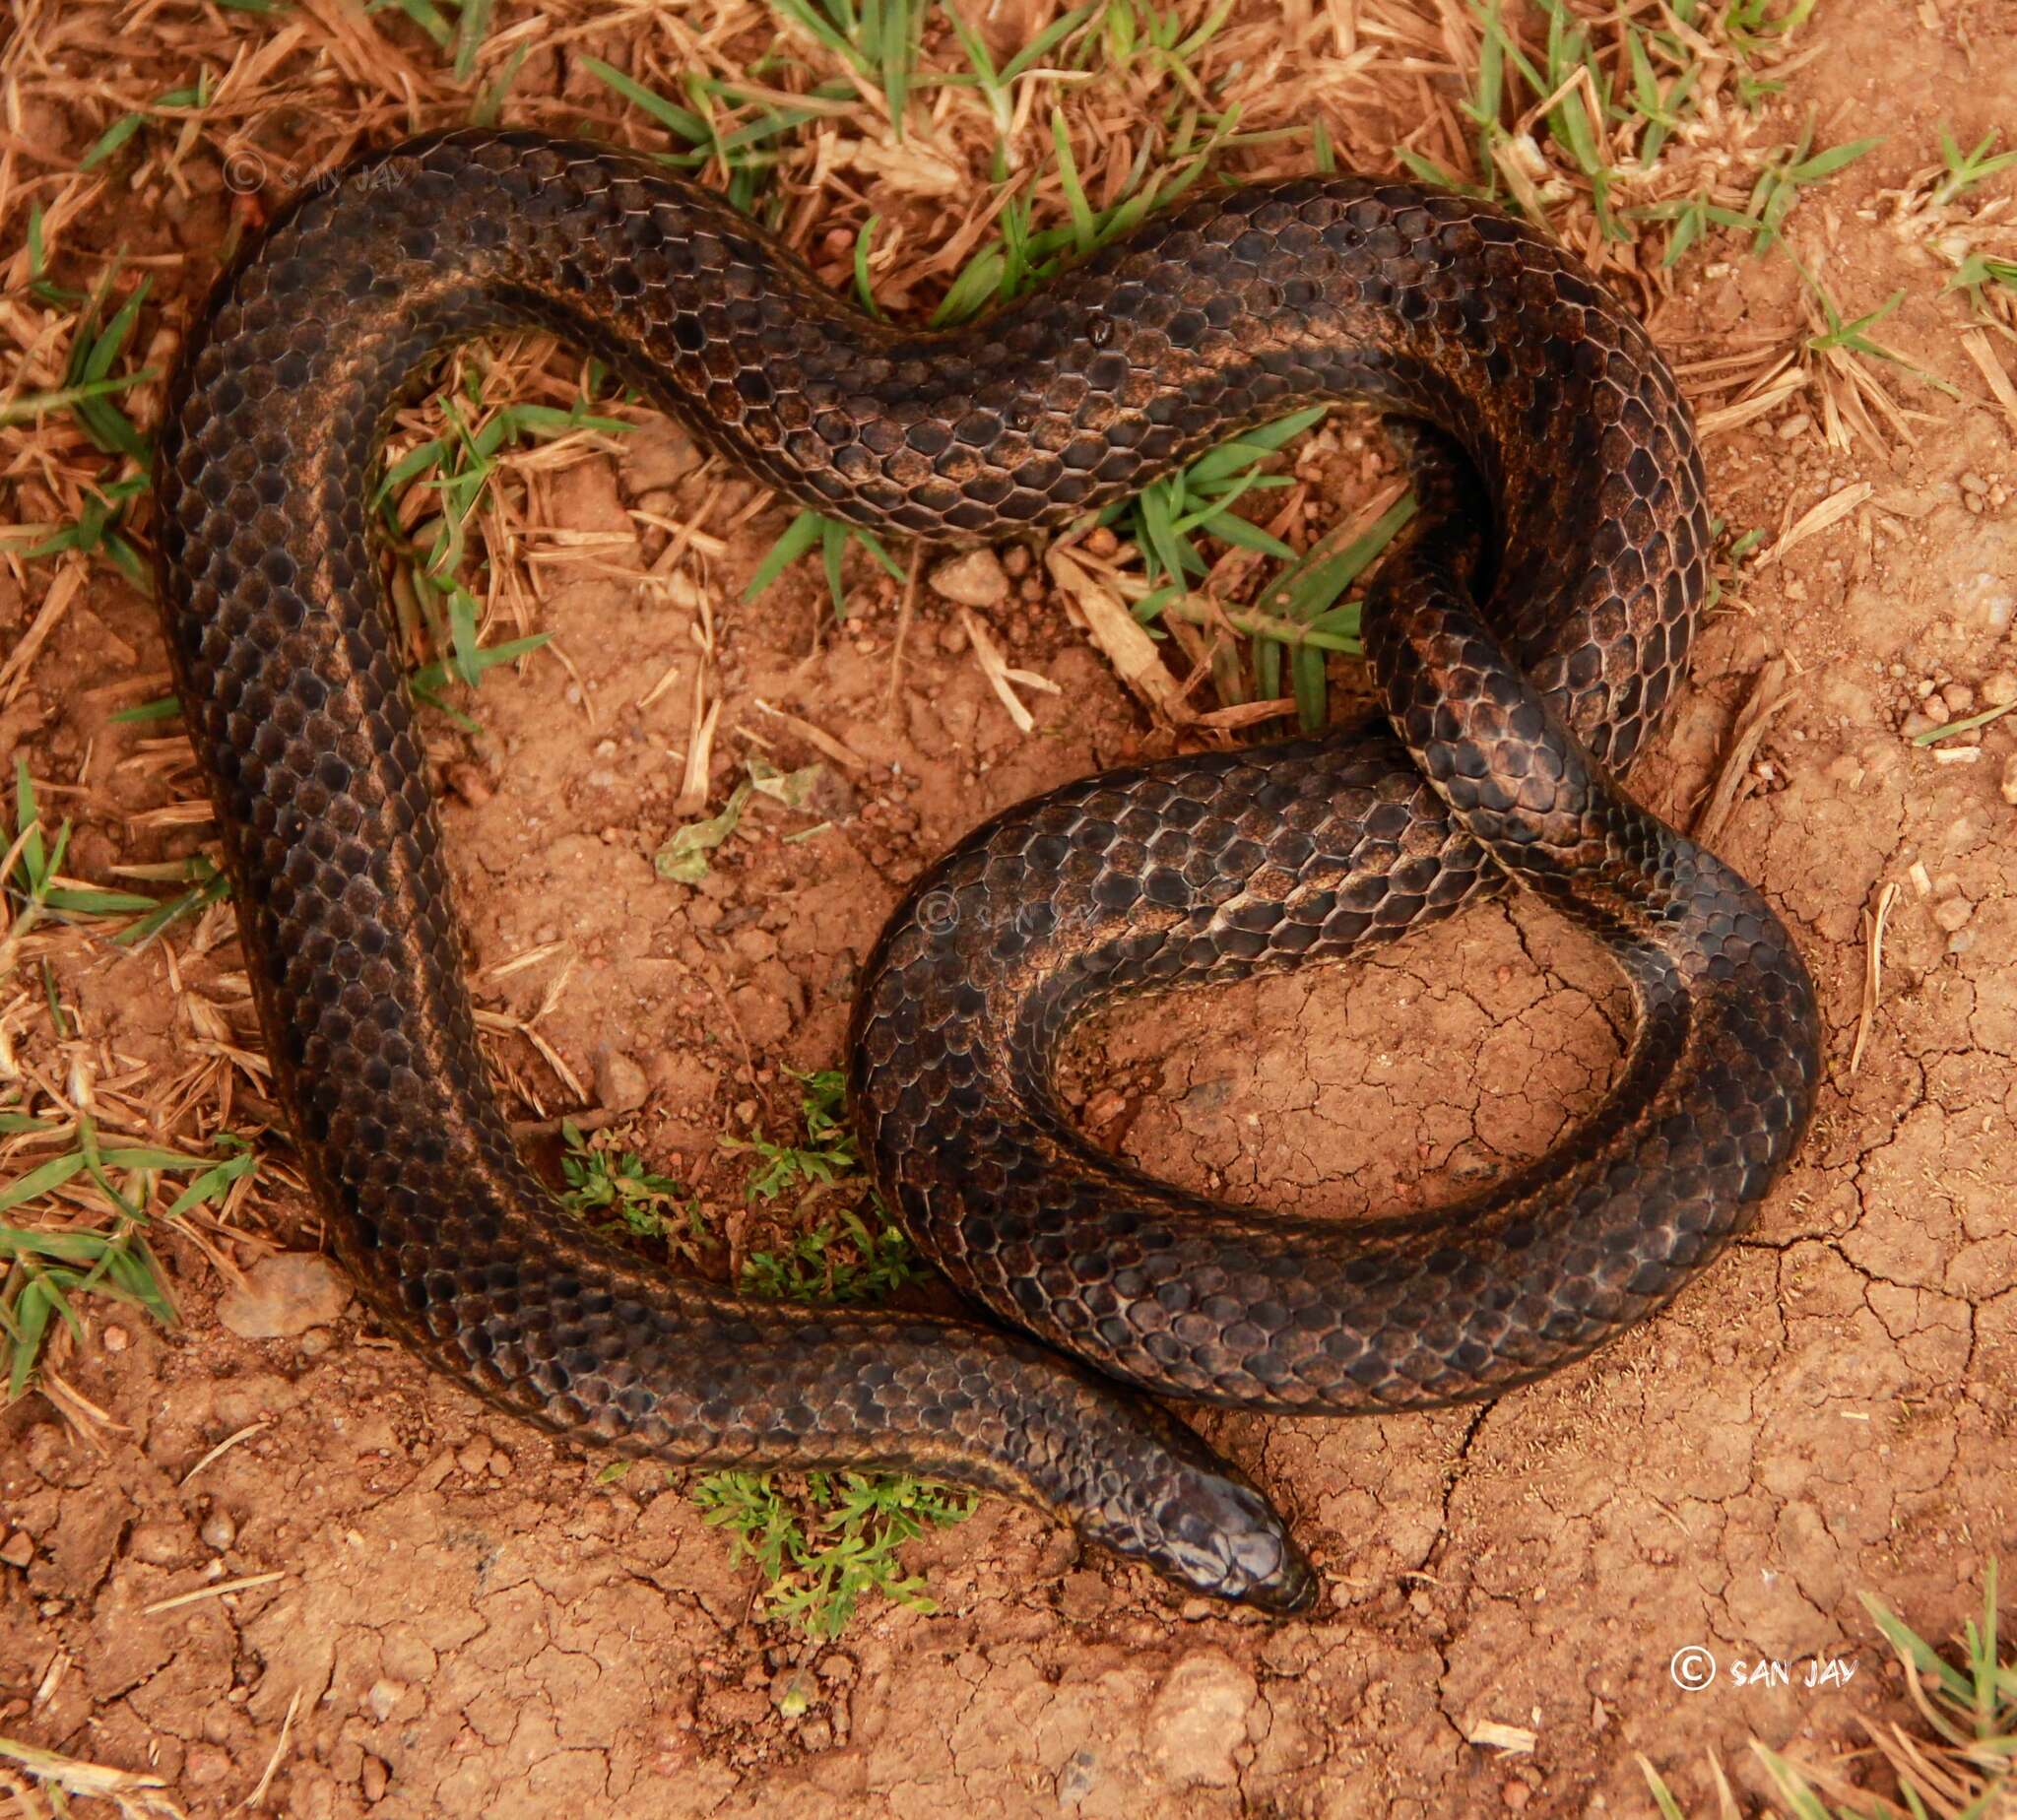 Image of Perrotet's Mountain Snake